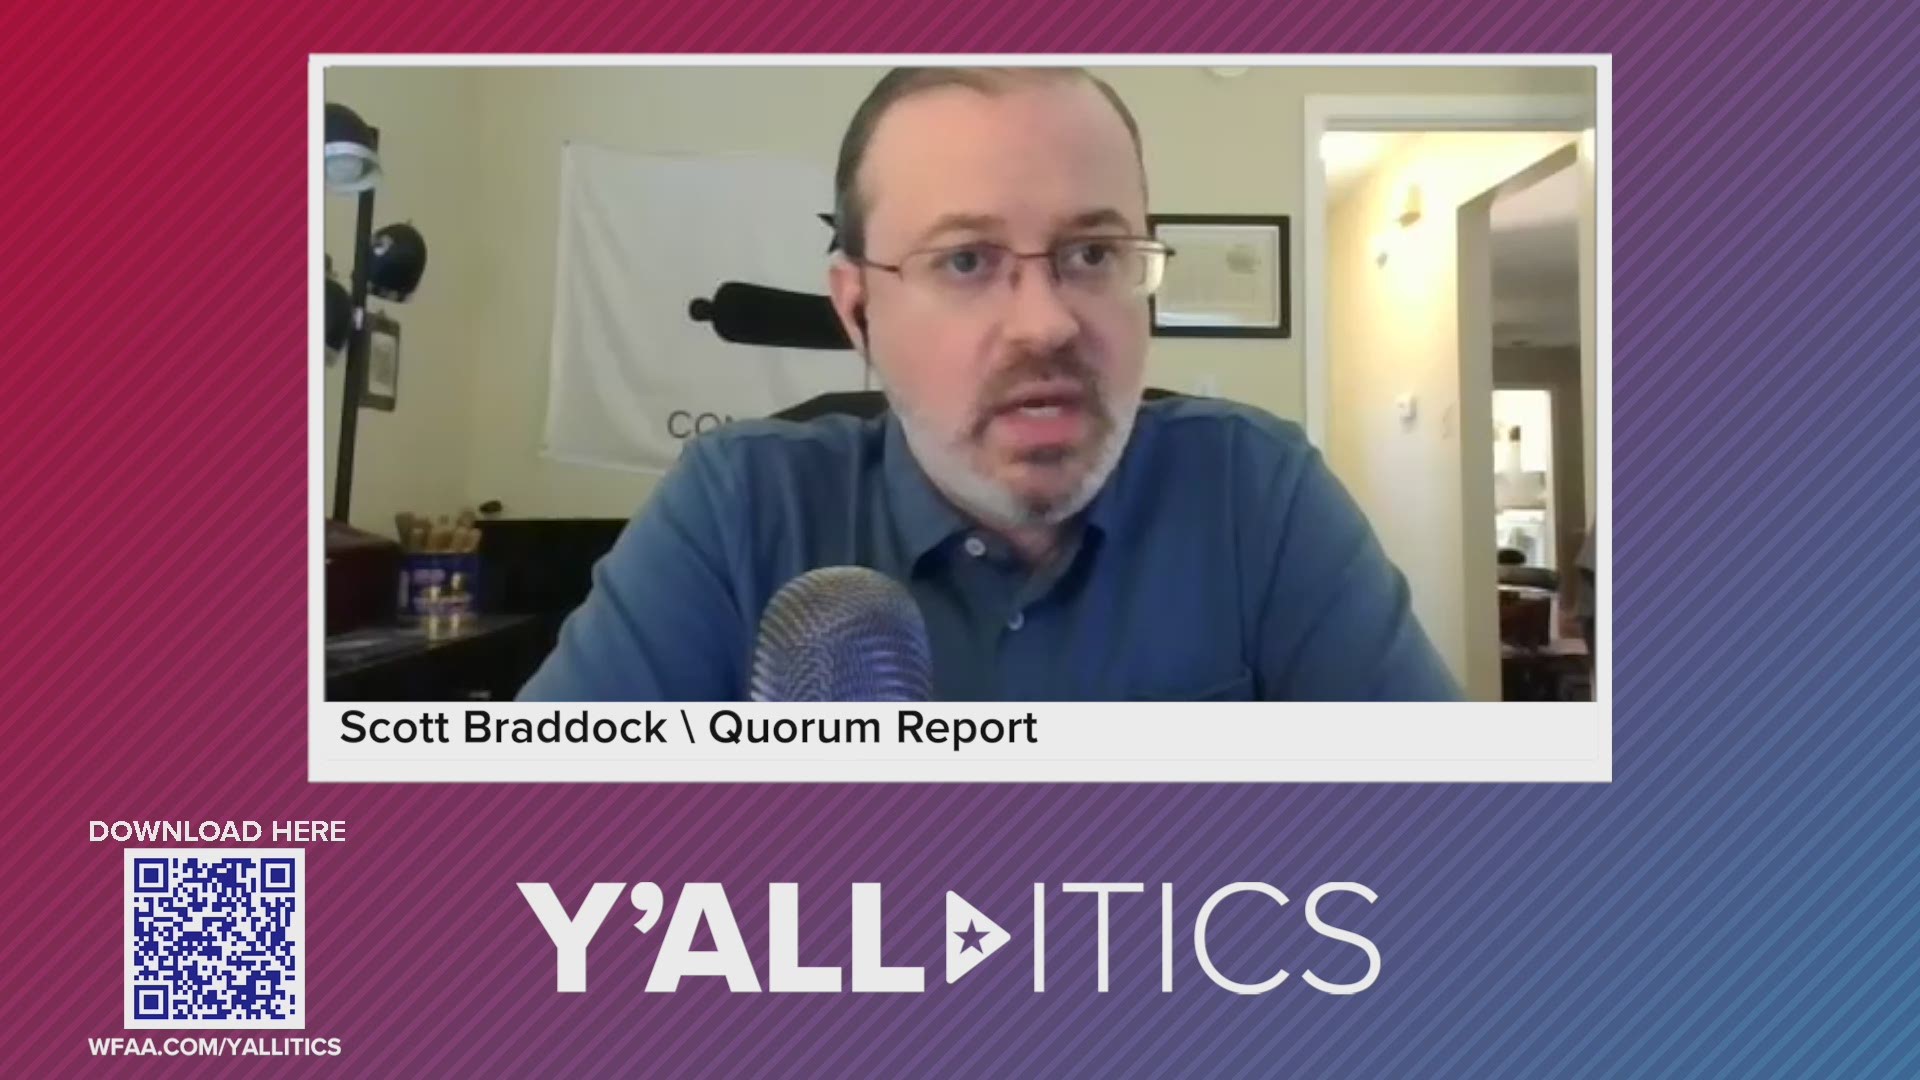 Scott Braddock, editor of The Quorum Report, is one of the most sourced journalists in Austin.